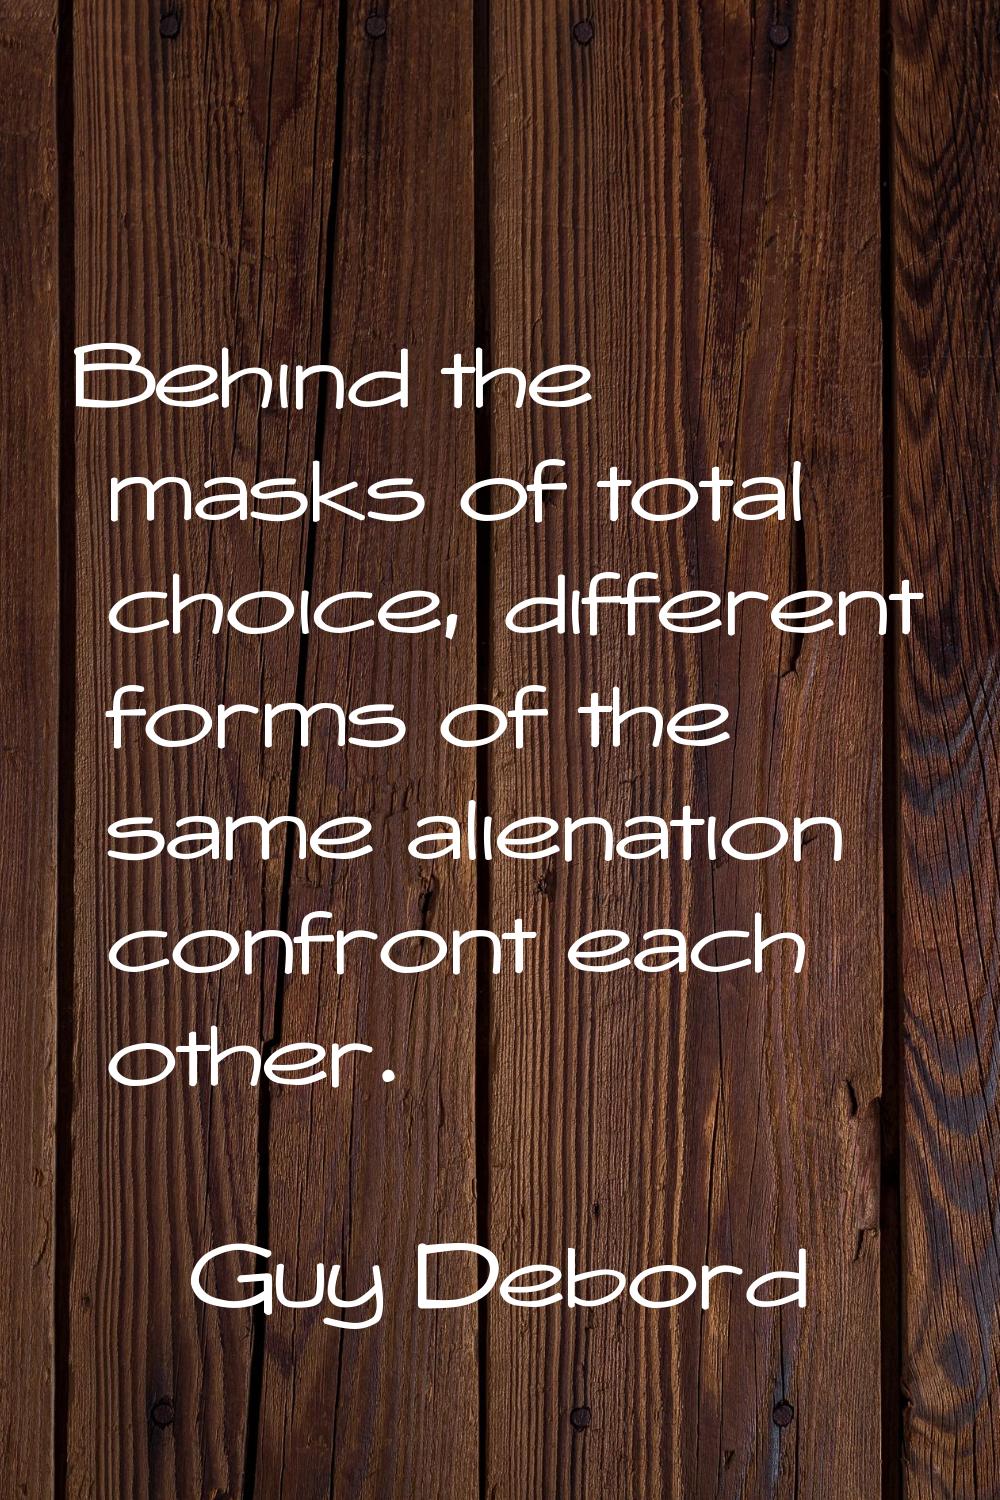 Behind the masks of total choice, different forms of the same alienation confront each other.